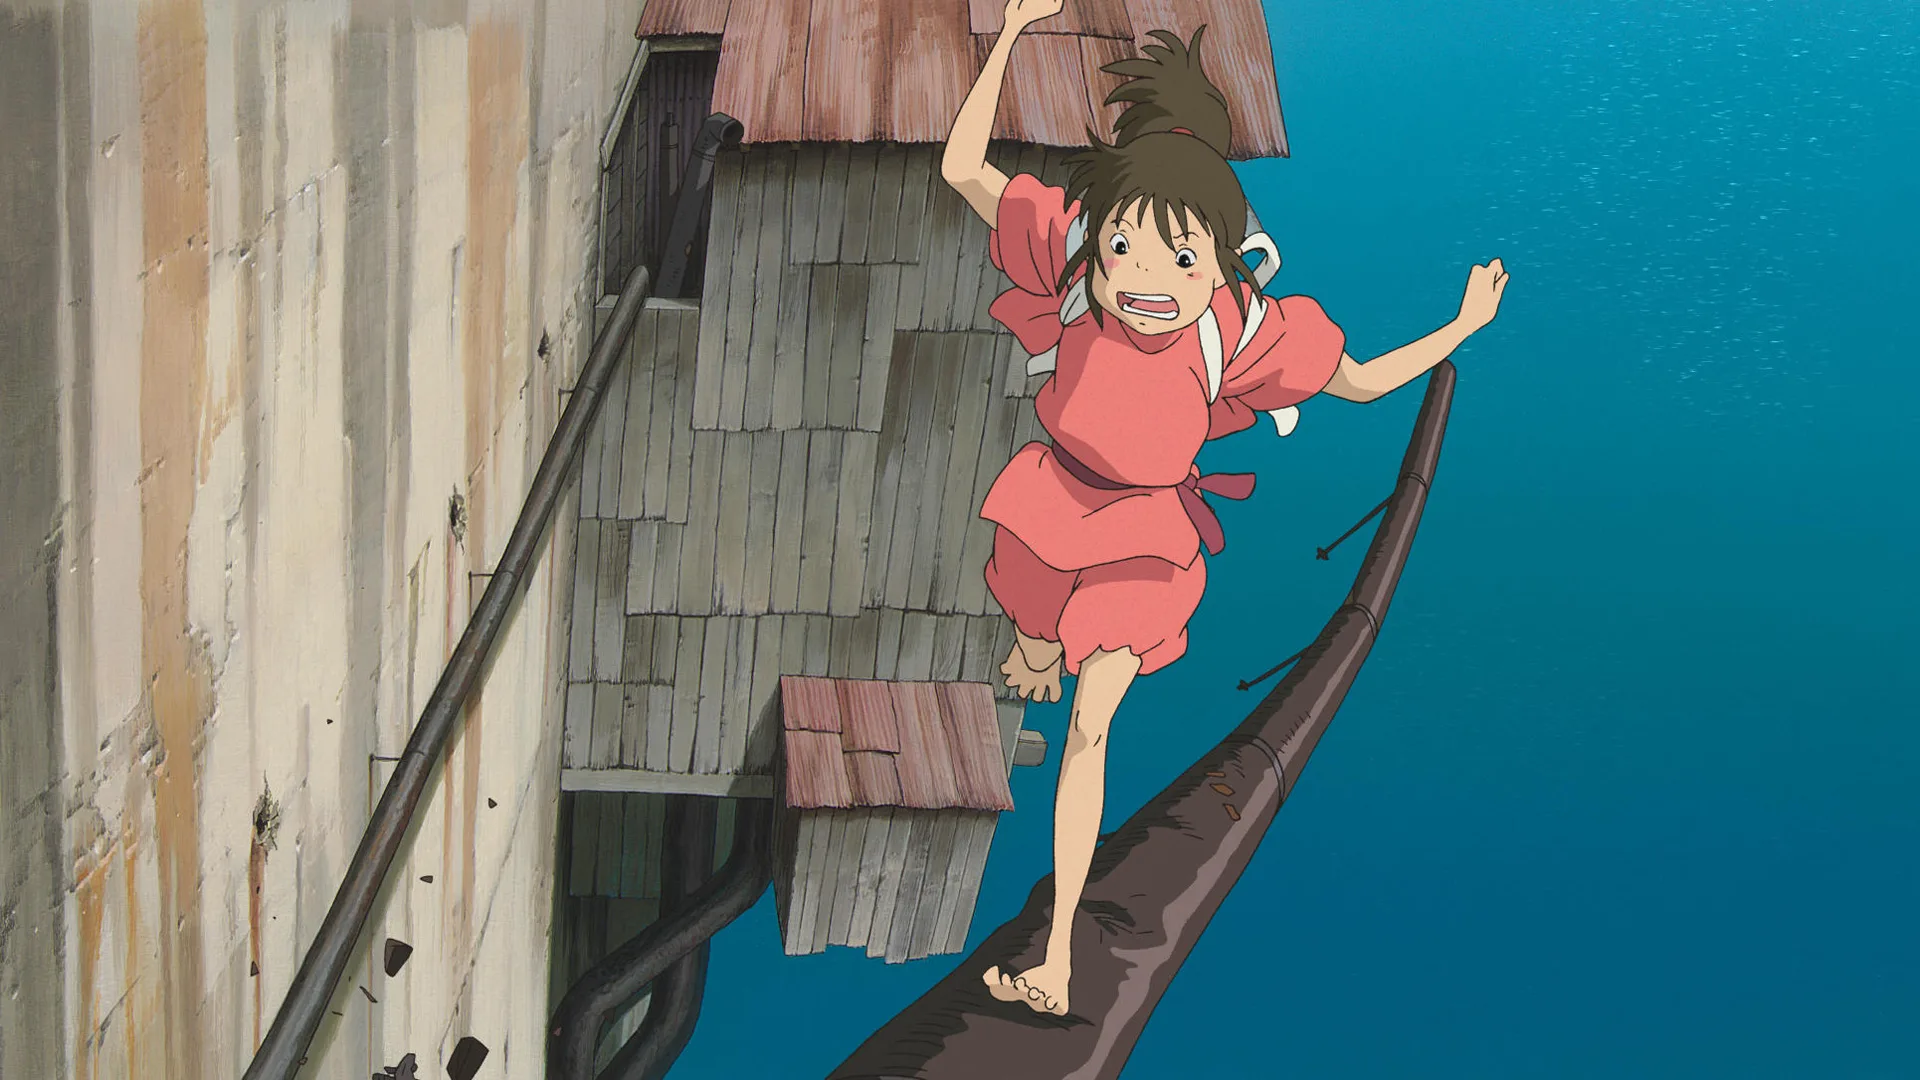 A still from the film Spirited Away showing Chihiro walking on a tight rope over the sea with a scared expression on her face